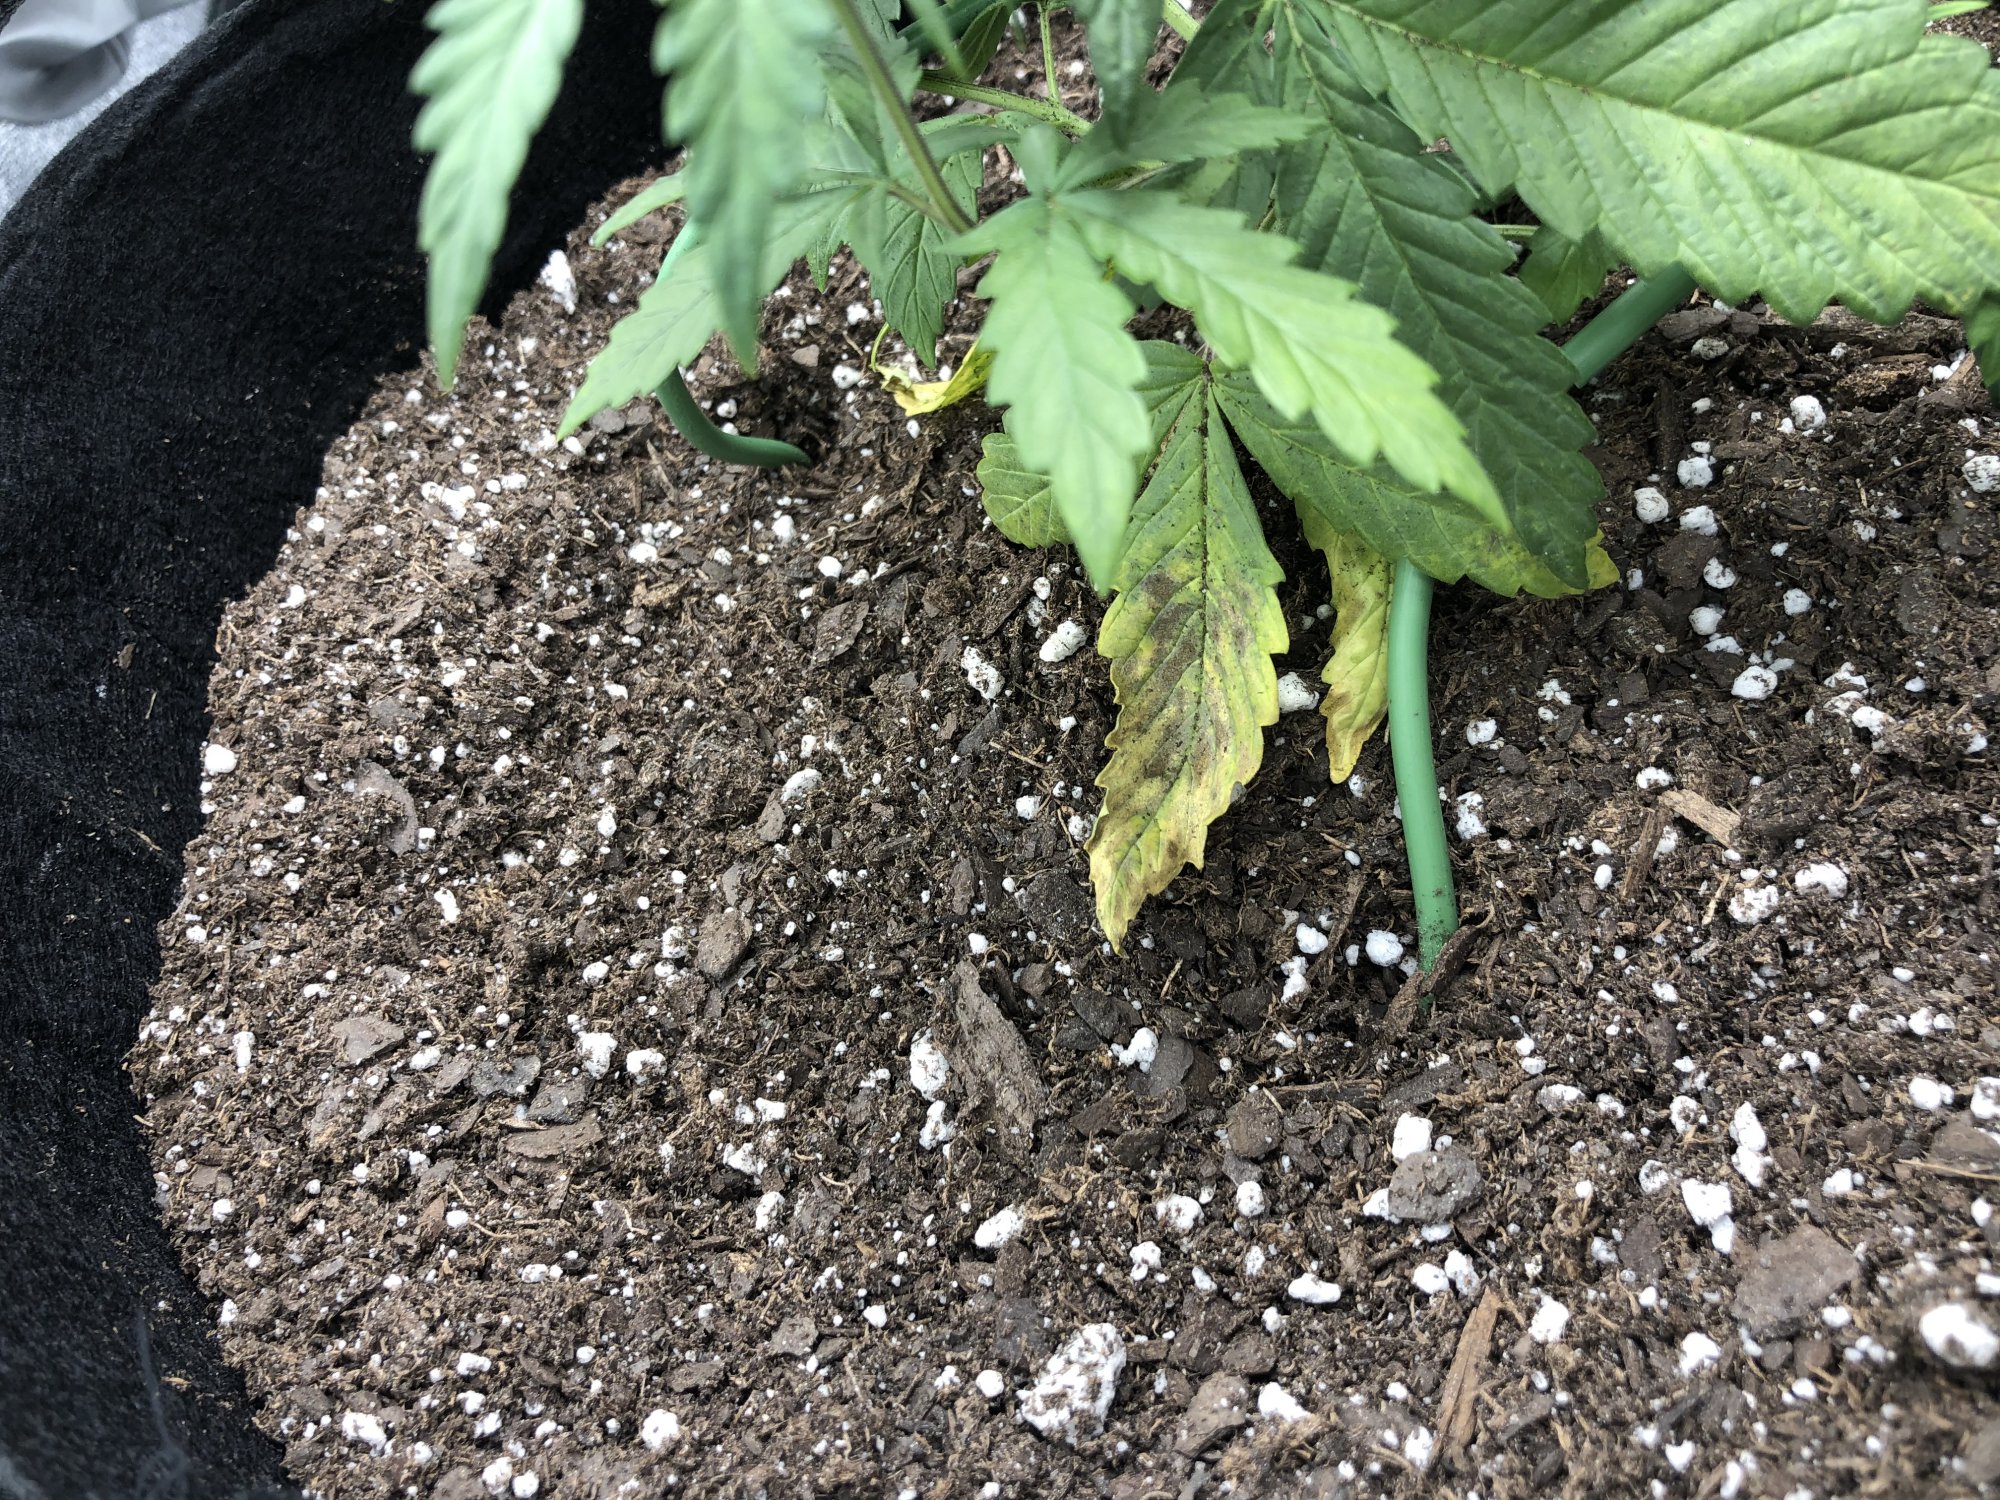 Looking for help first time growing